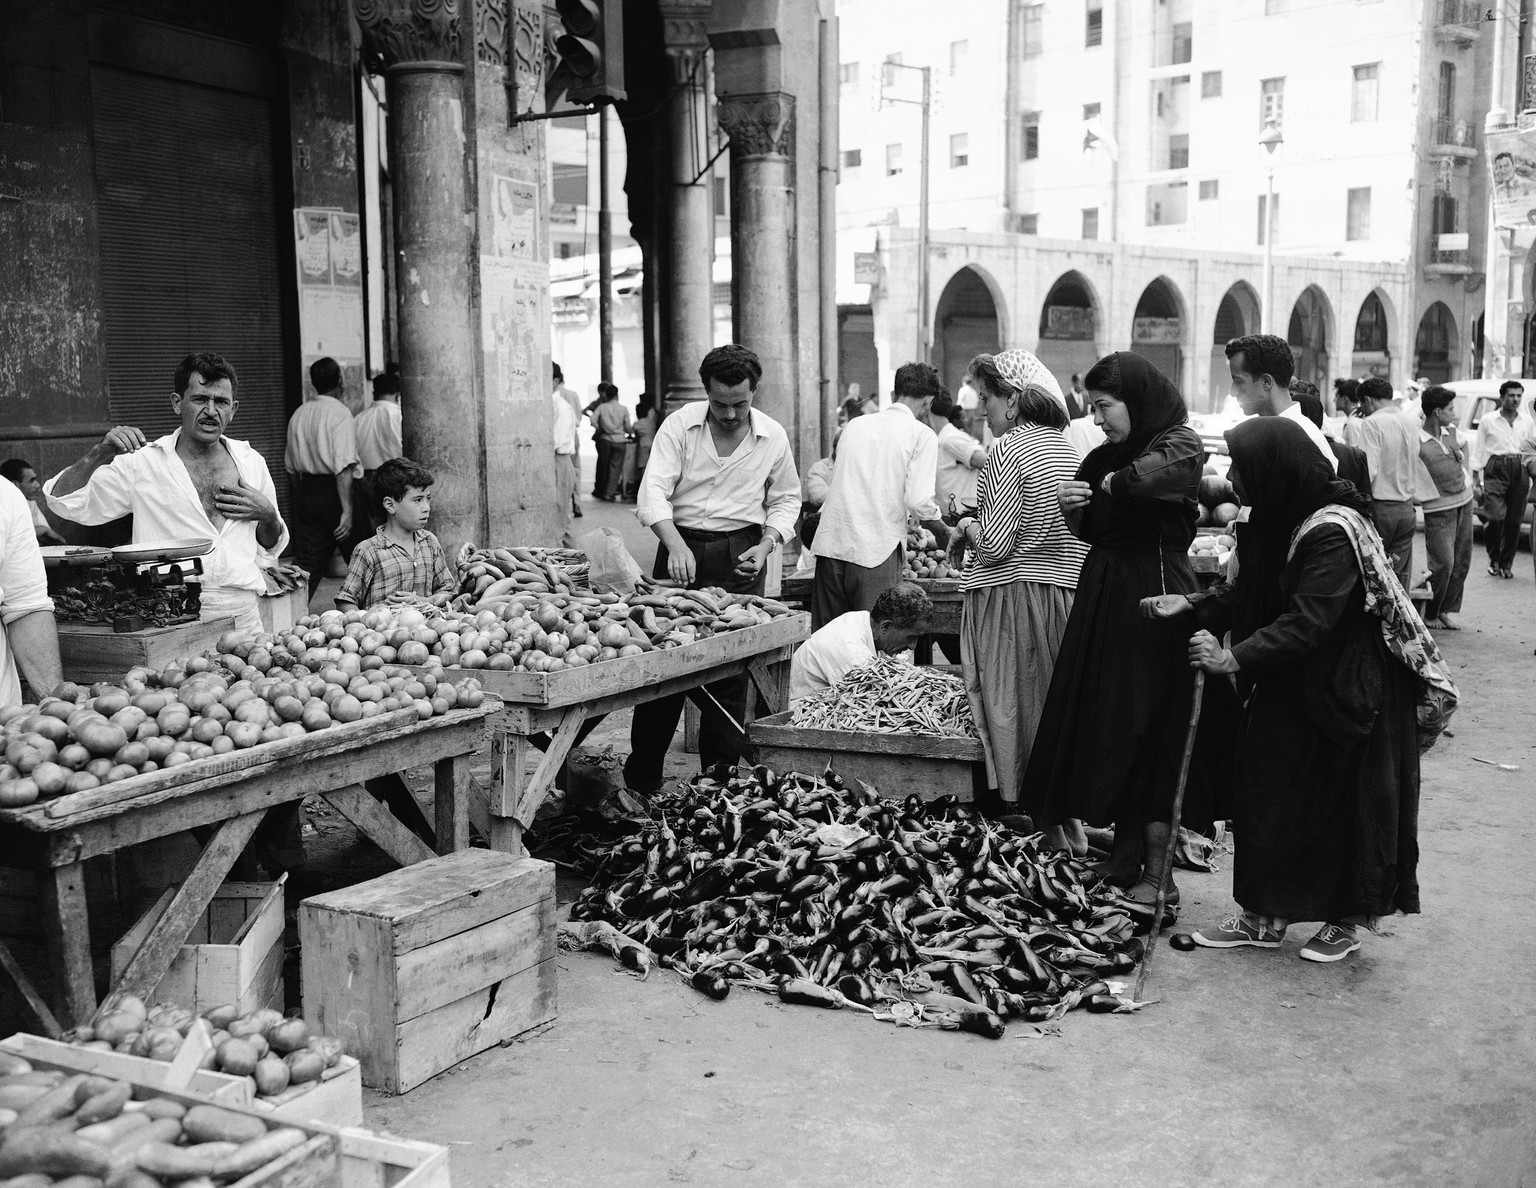 Women shopping in the market place in Beirut, Lebanon on July 23, 1958. (AP Photo)